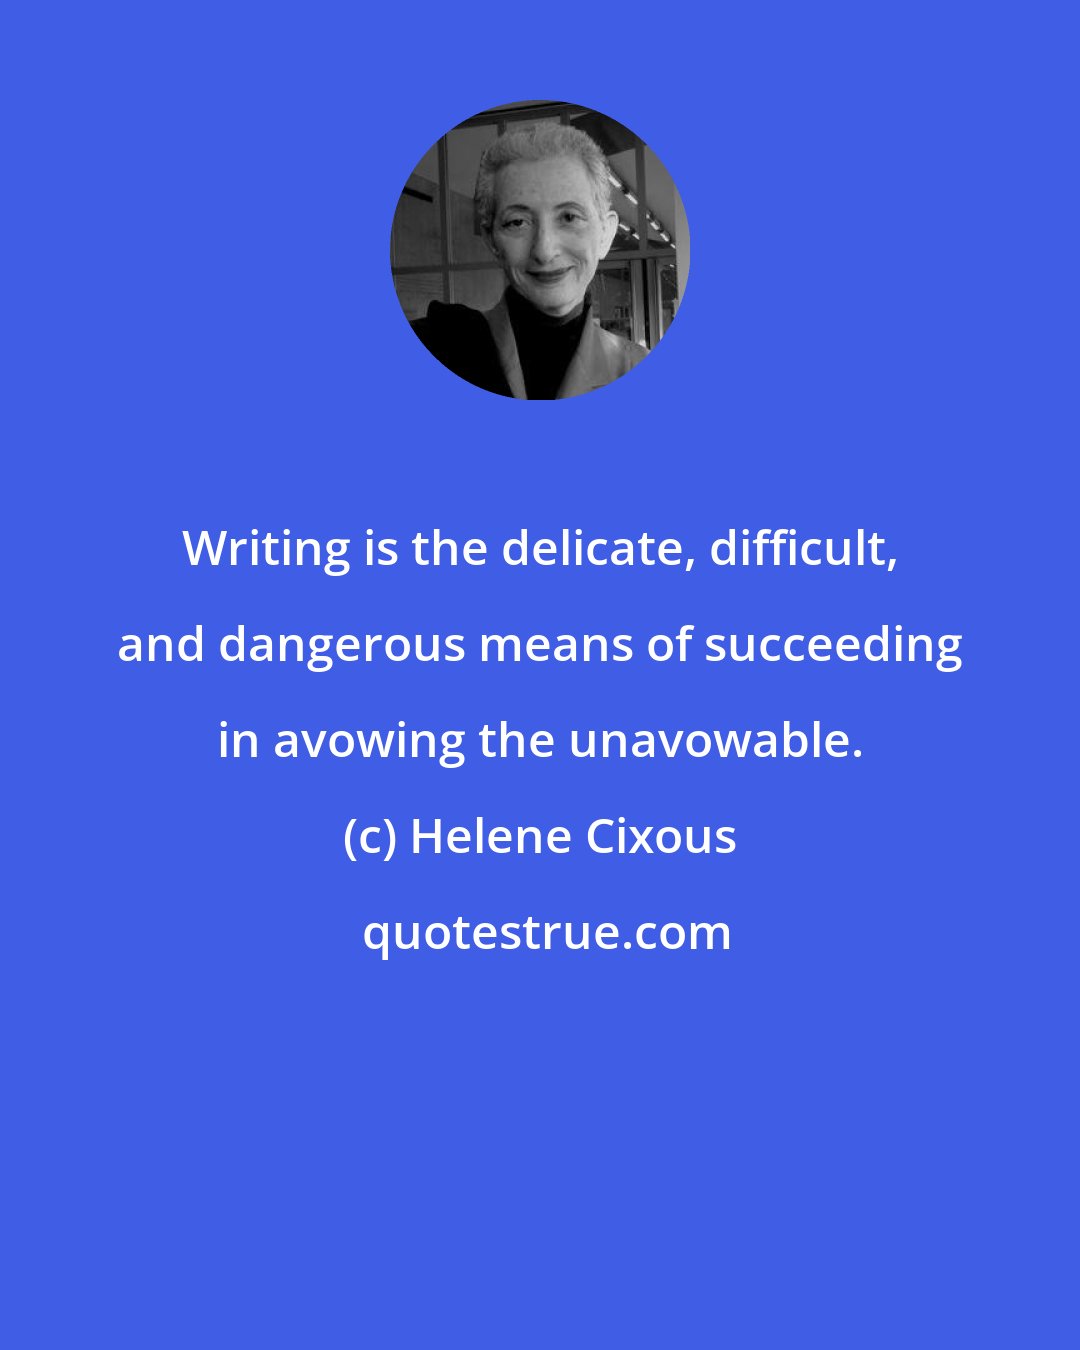 Helene Cixous: Writing is the delicate, difficult, and dangerous means of succeeding in avowing the unavowable.